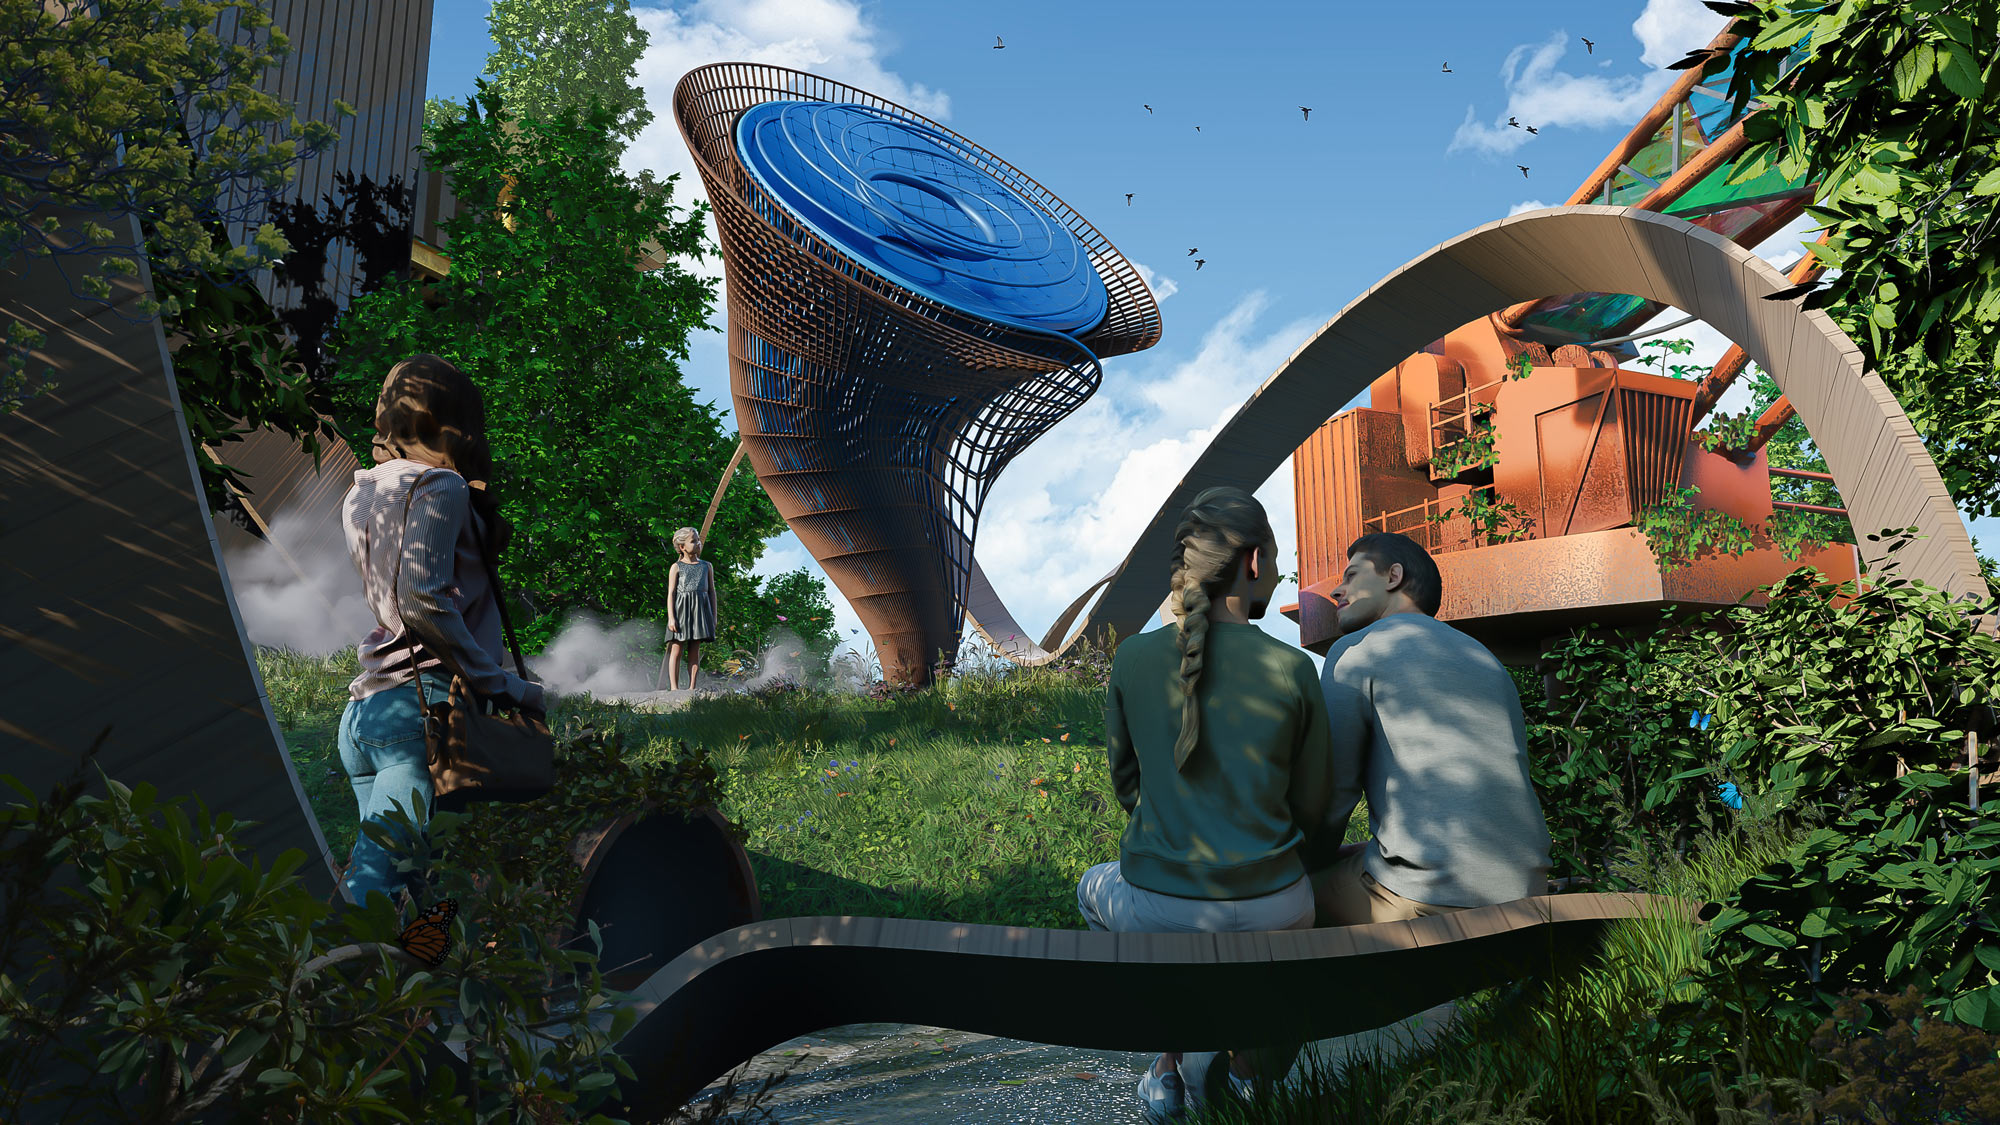 A render of SEE MONSTER’s garden lab, where visitors enjoying the natural surroundings, and a large cone-shaped ‘solar tree’, and example of renewable energy technology.